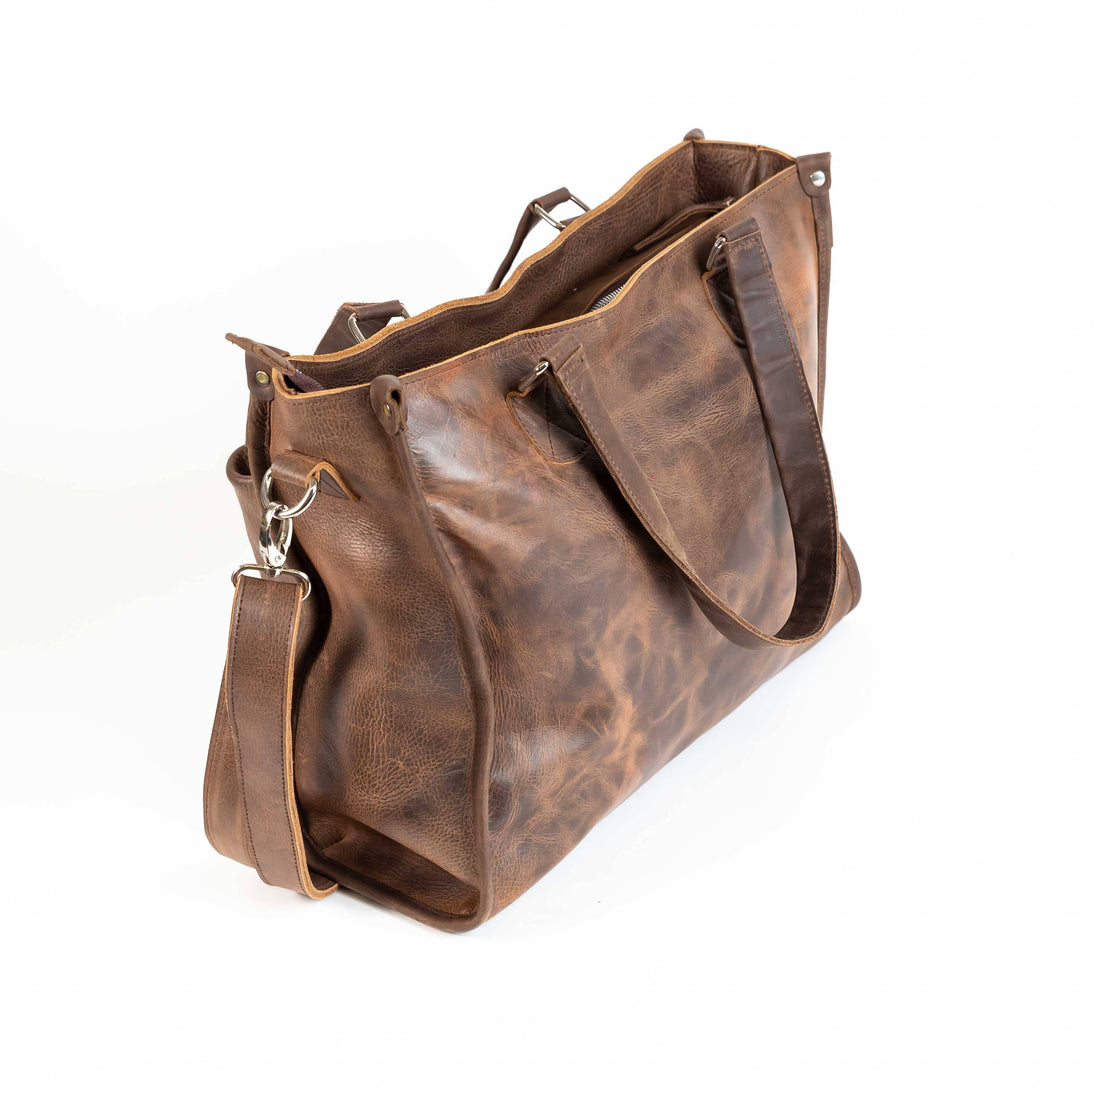 The Nashville Leather Tote